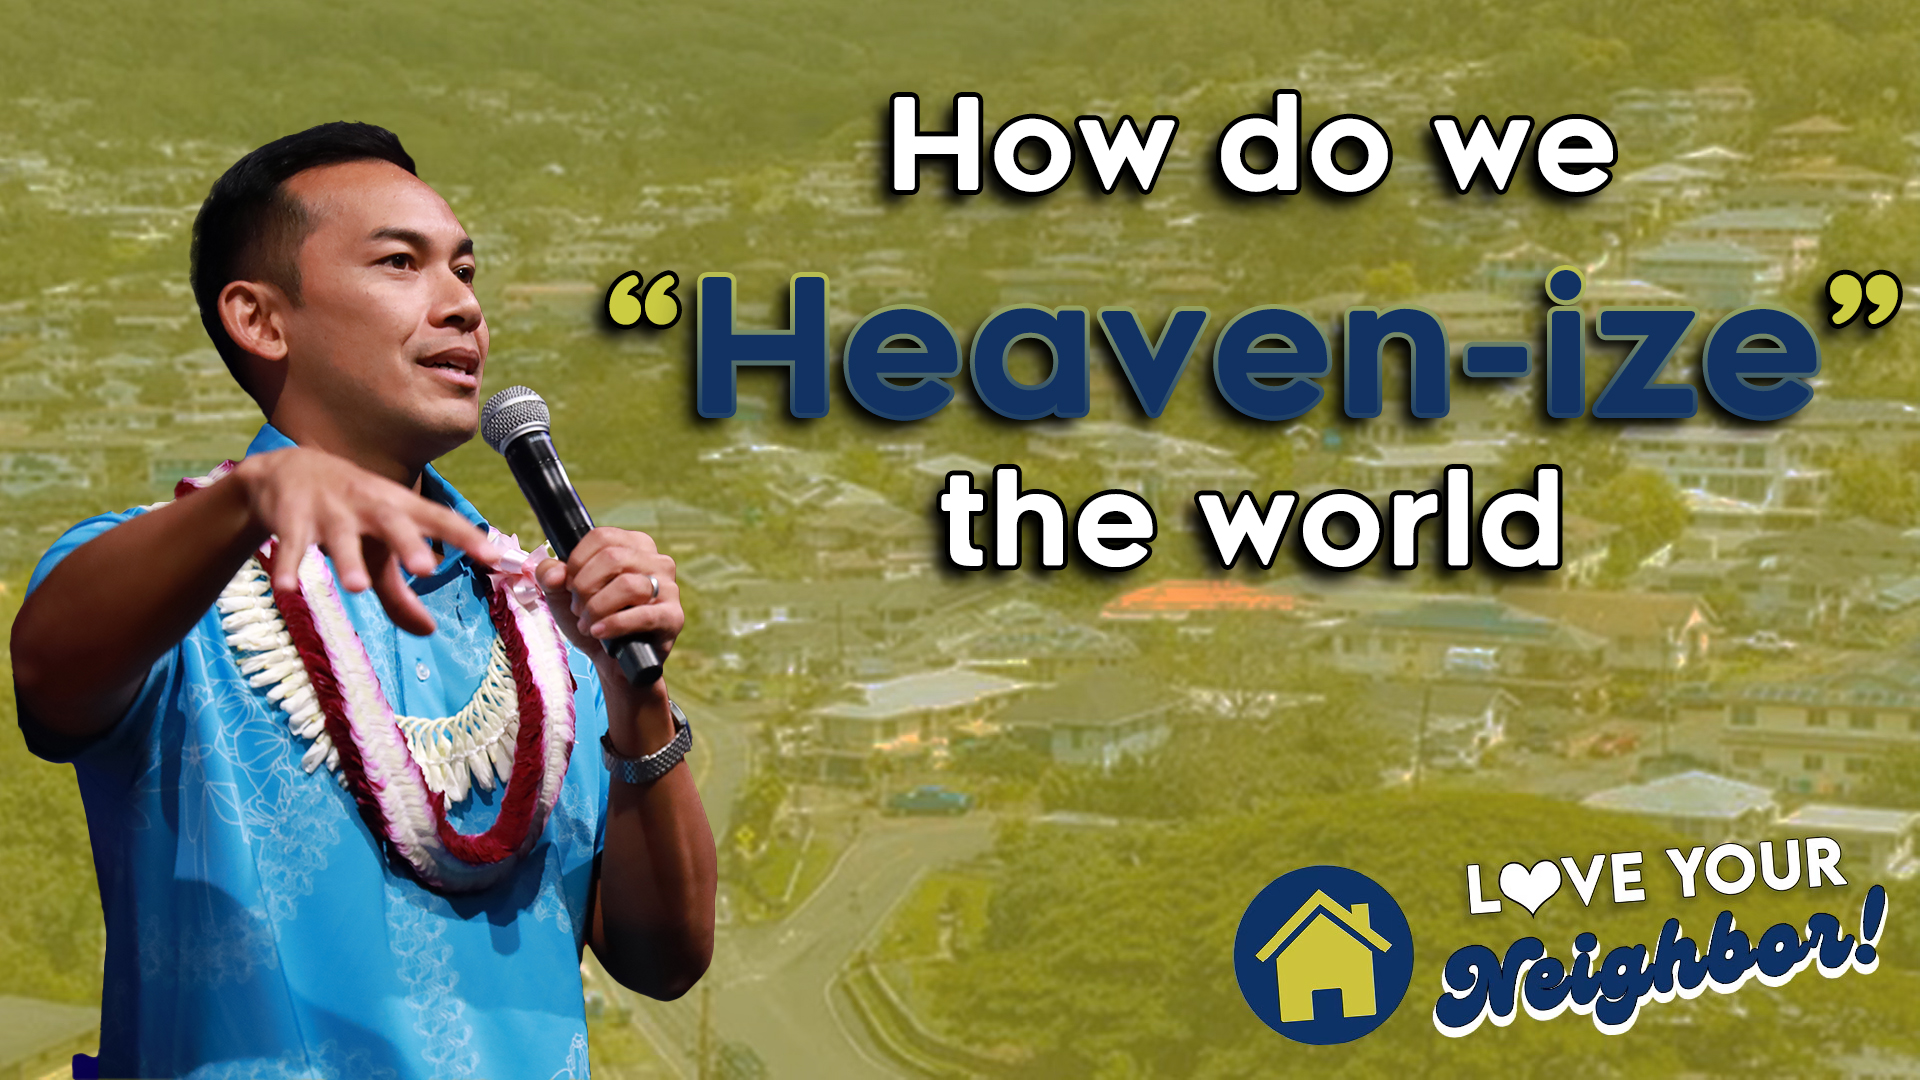 How to "Heaven-ize" the World